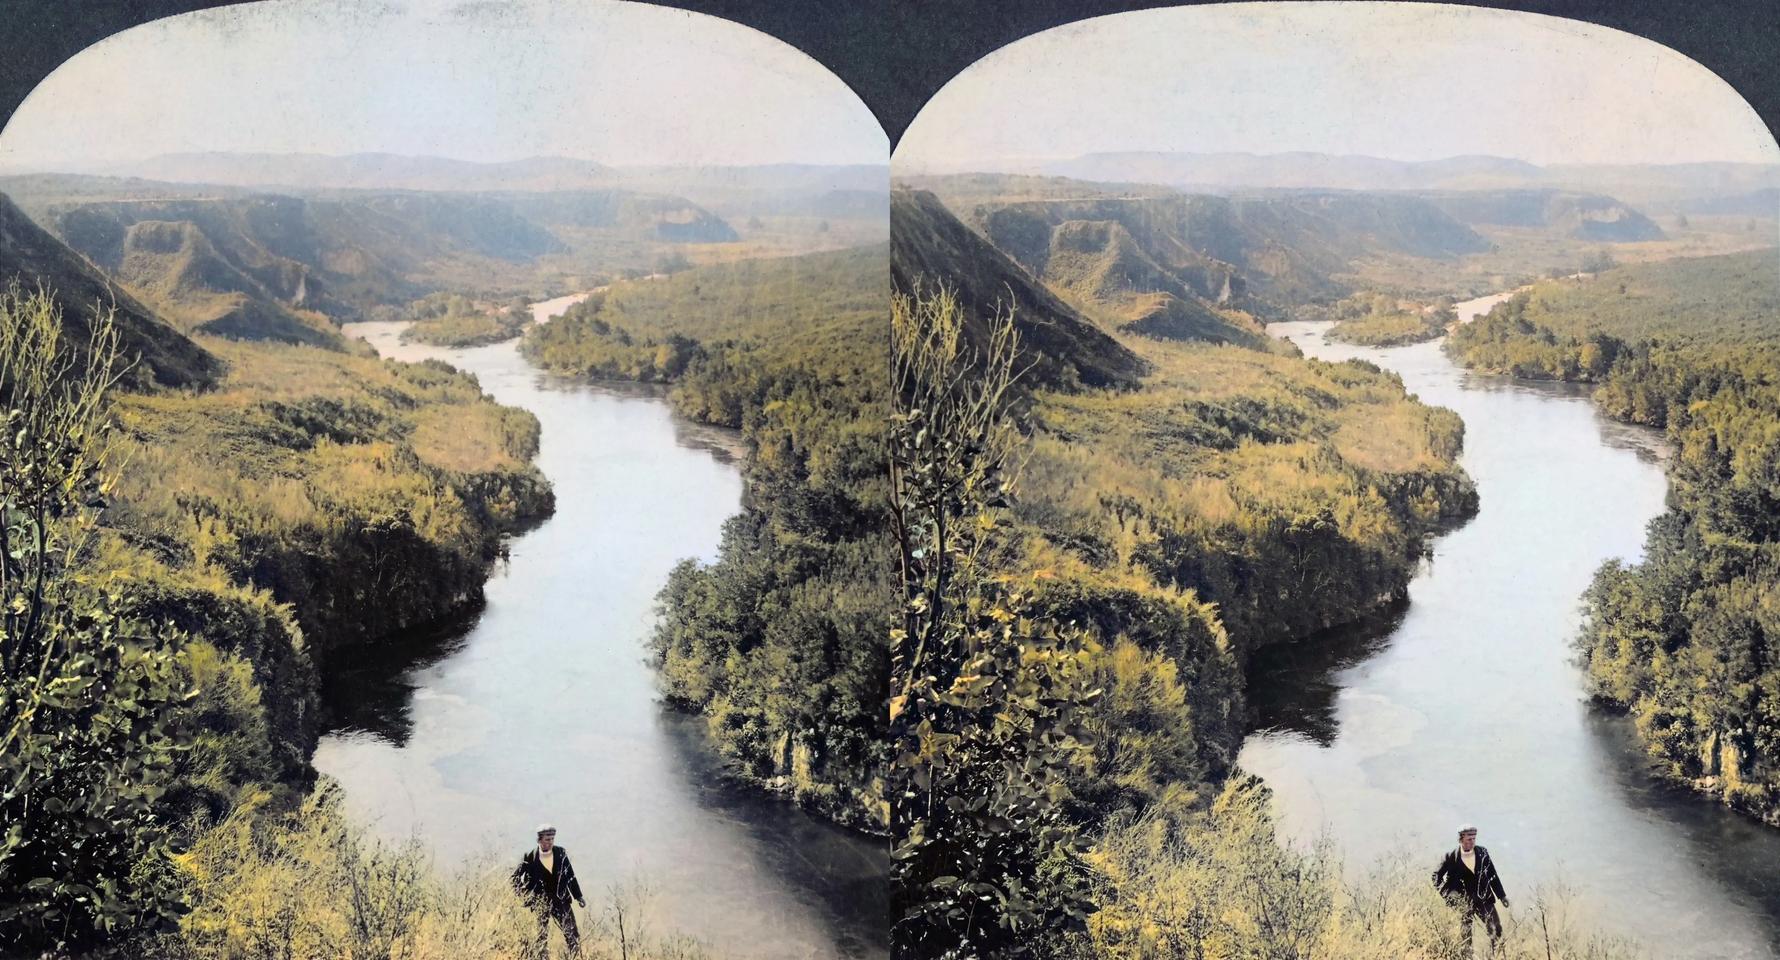 ‘The Waikato river as it flows from lake Taupo, New Zealand’ 1921